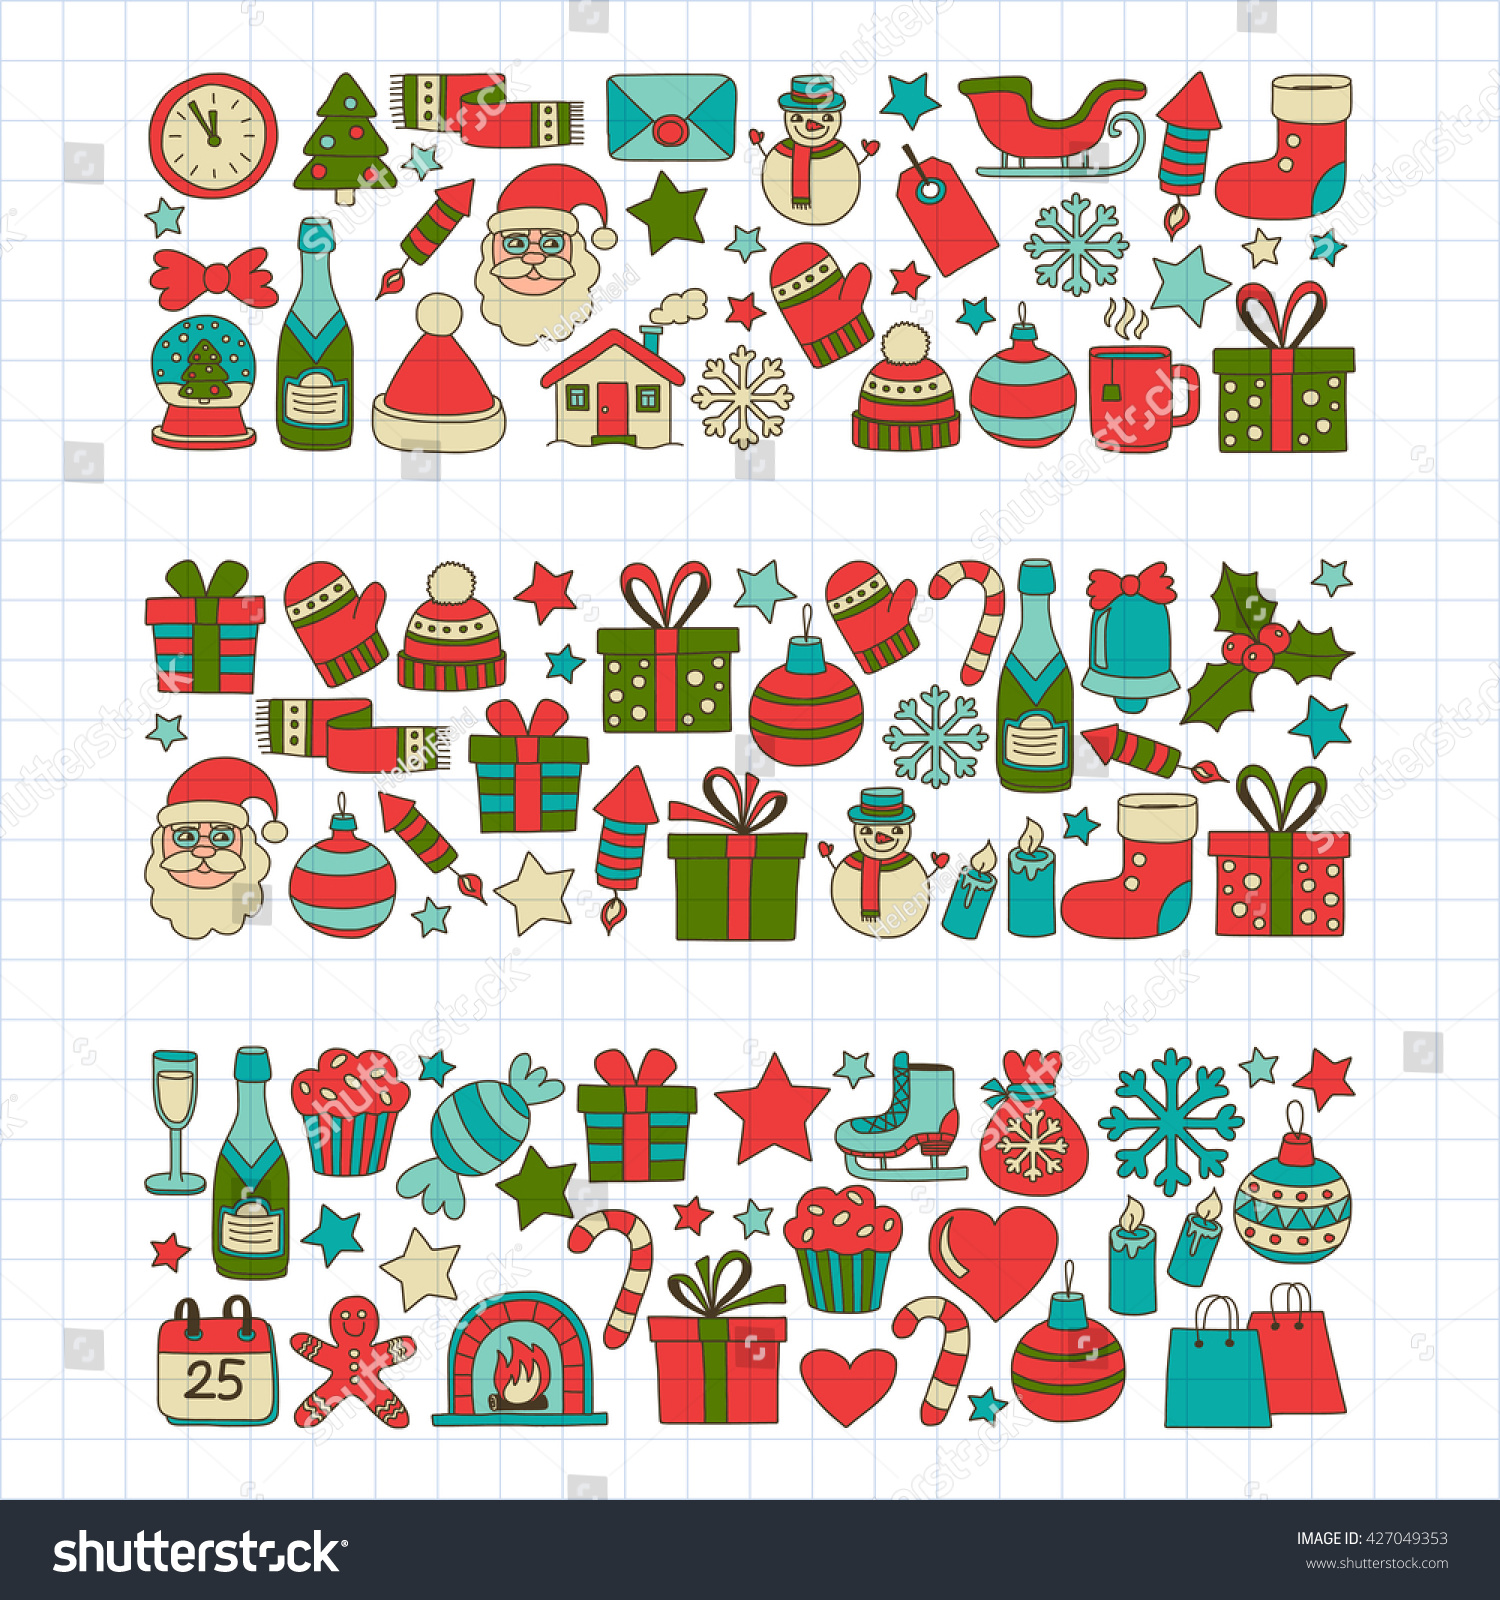 Doodle Vector Icons Merry Christmas And Happy New Year - 427049353 : Shutterstock